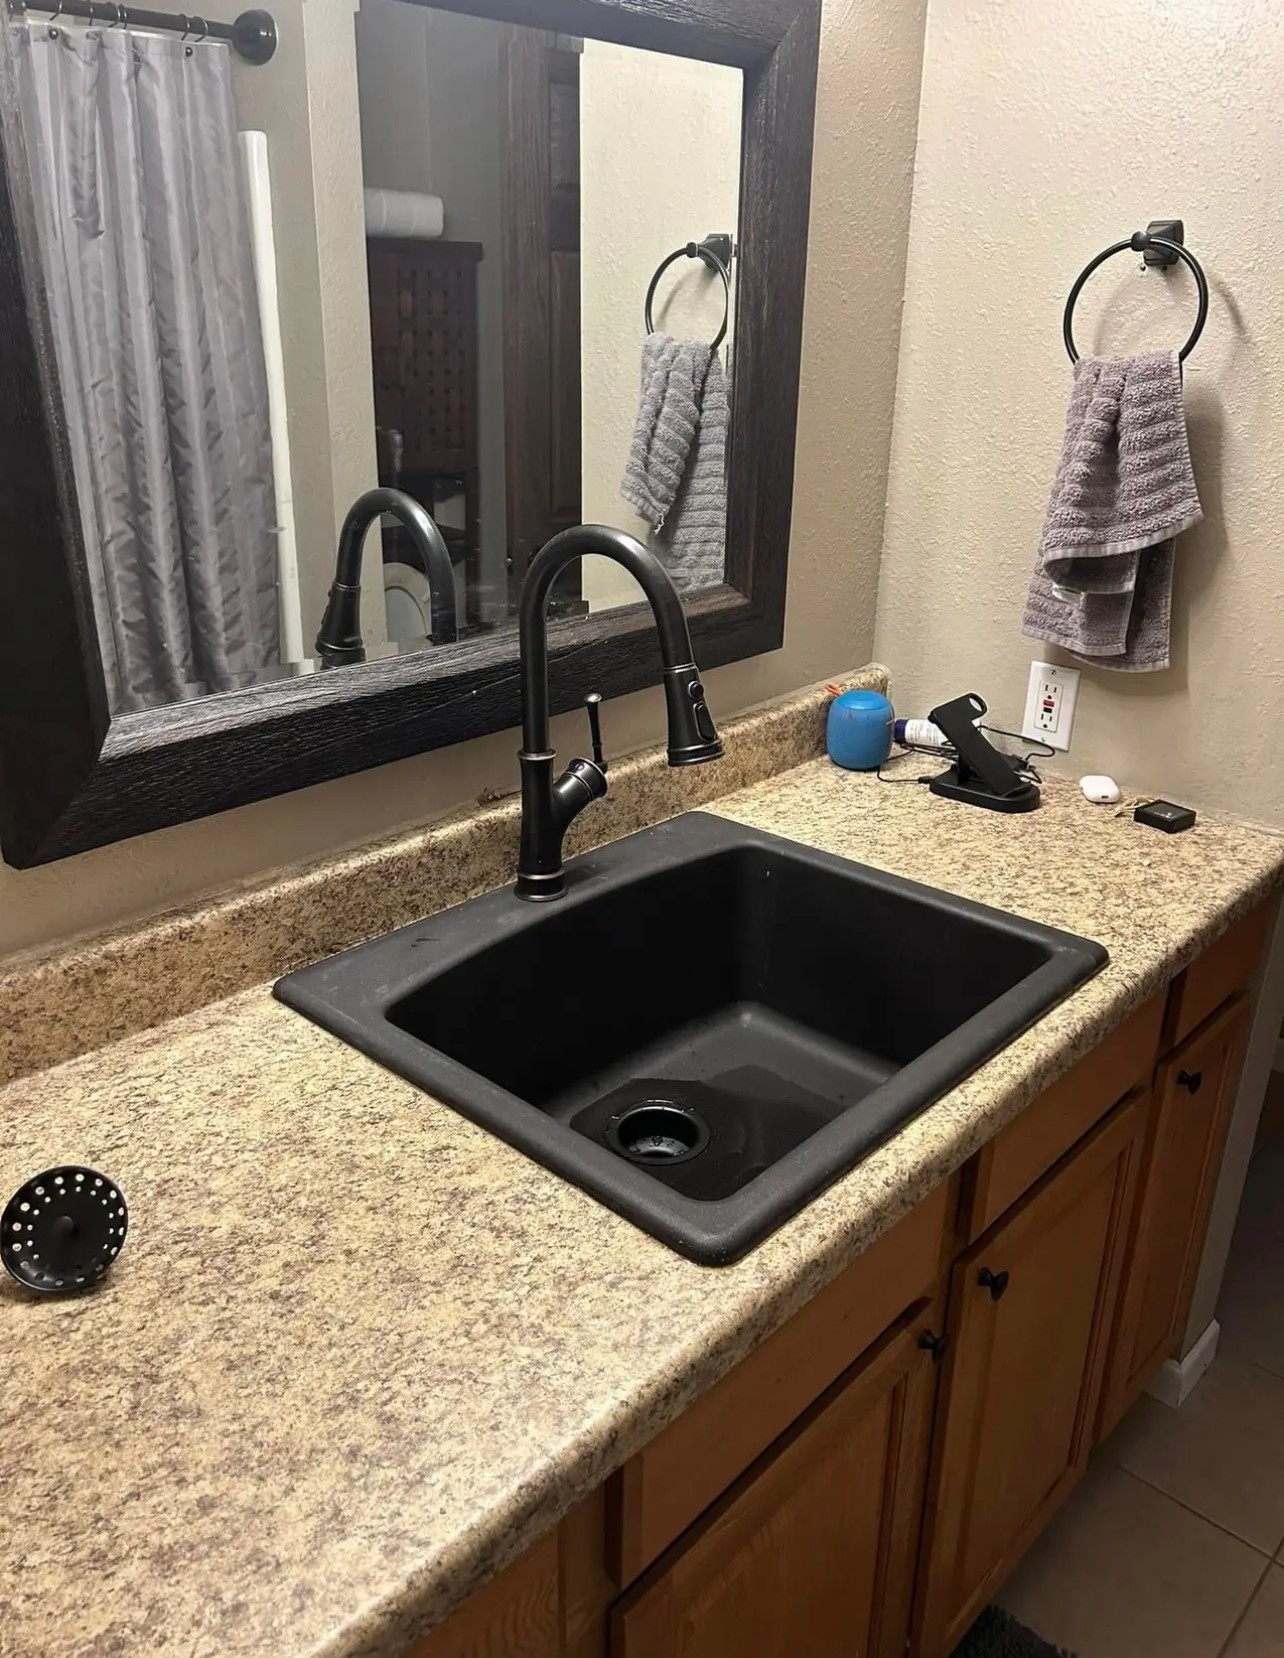 Faucet and sink replacement